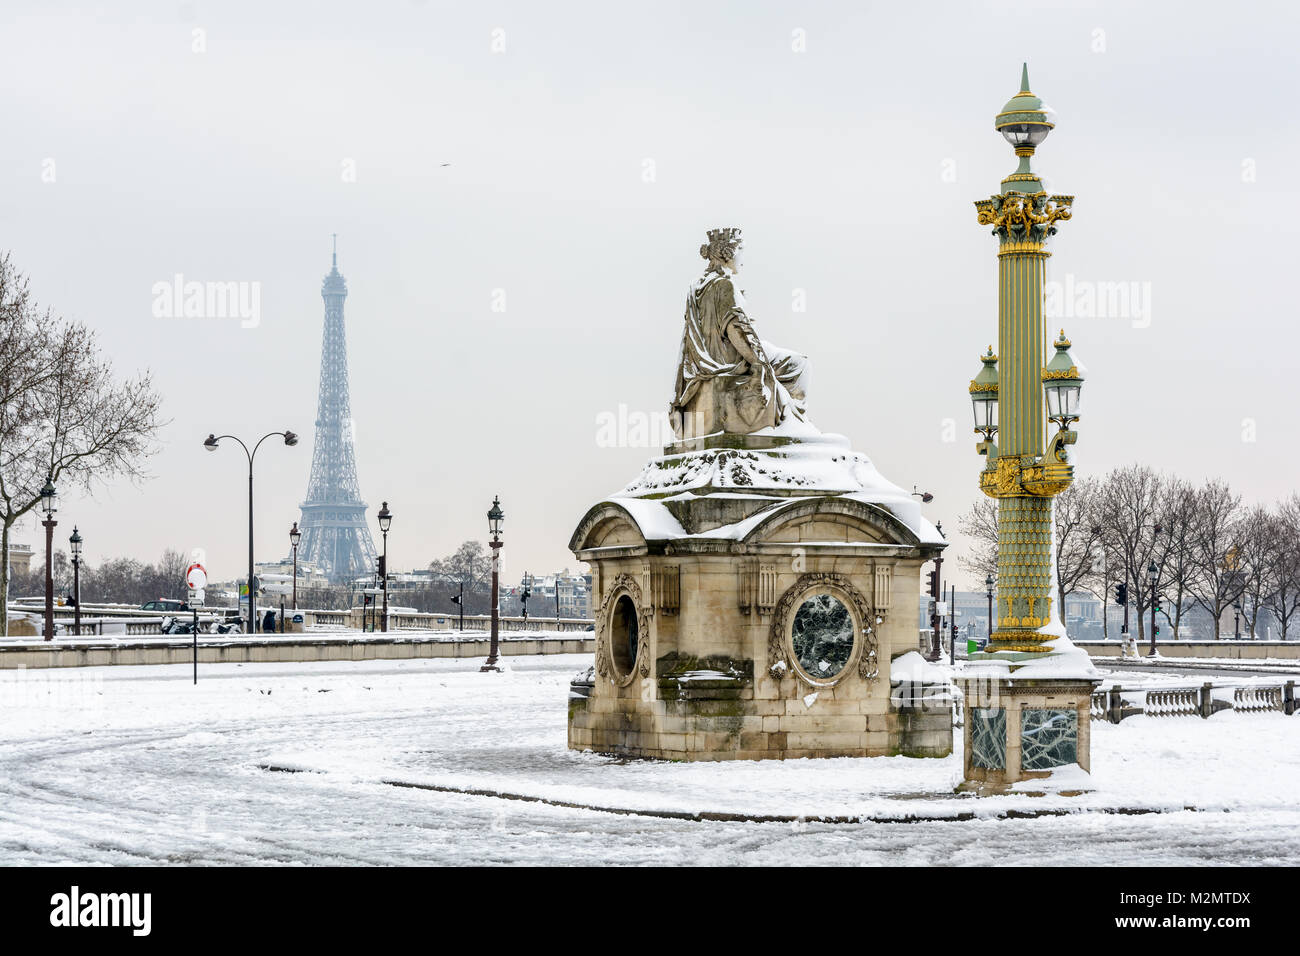 Winter in Paris in the snow. The Concorde square covered in snow with the statue of Marseille in the foreground and the Eiffel tower in the distance. Stock Photo